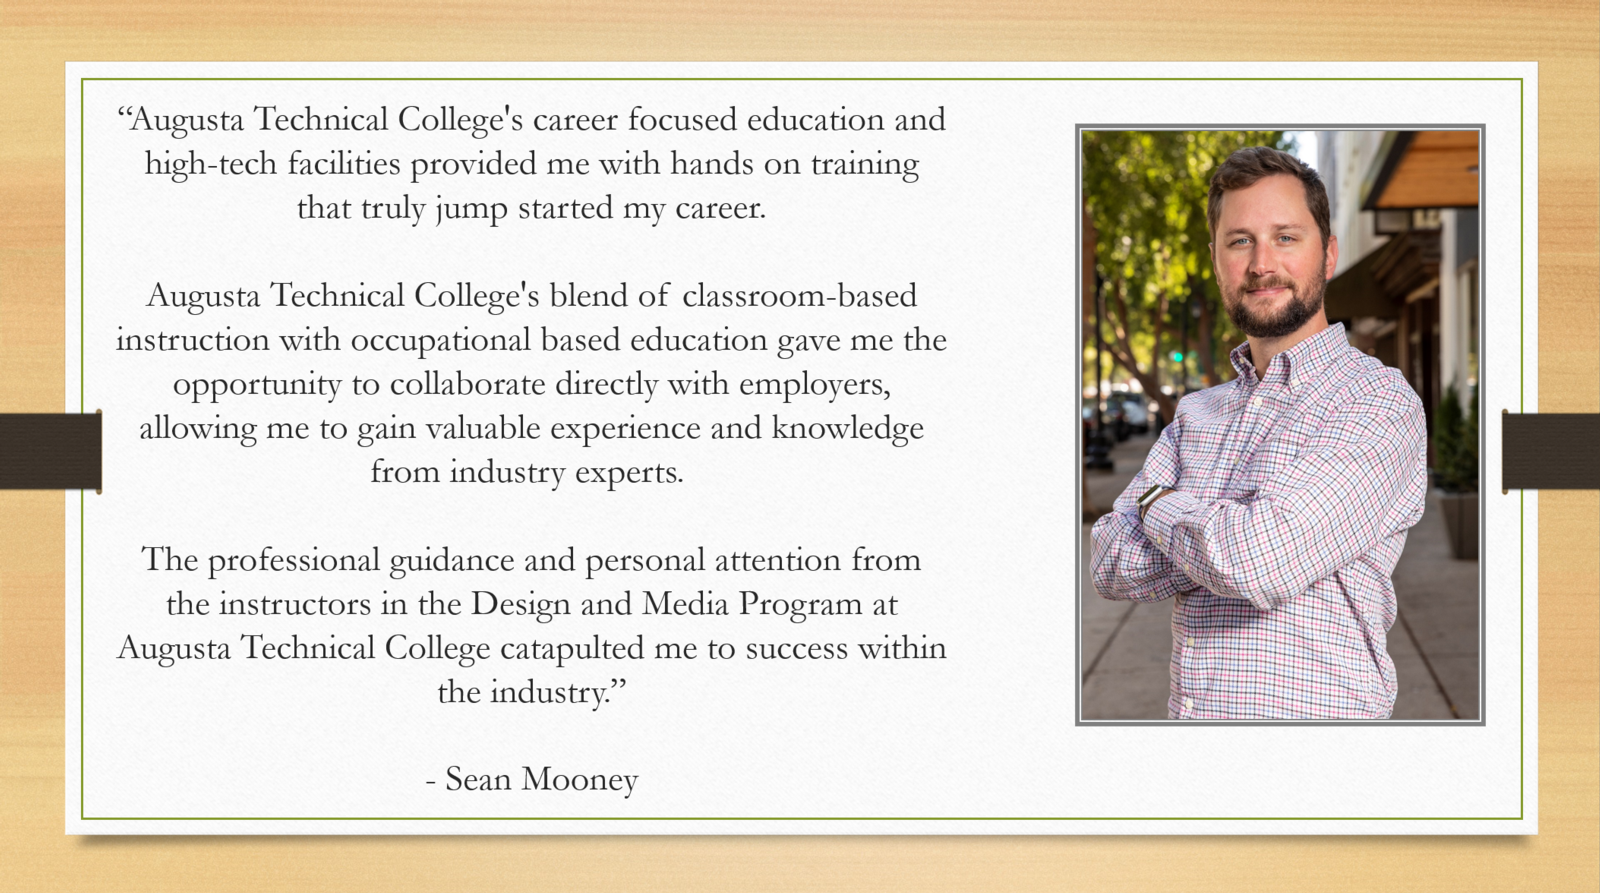 Sean Mooney and Quote